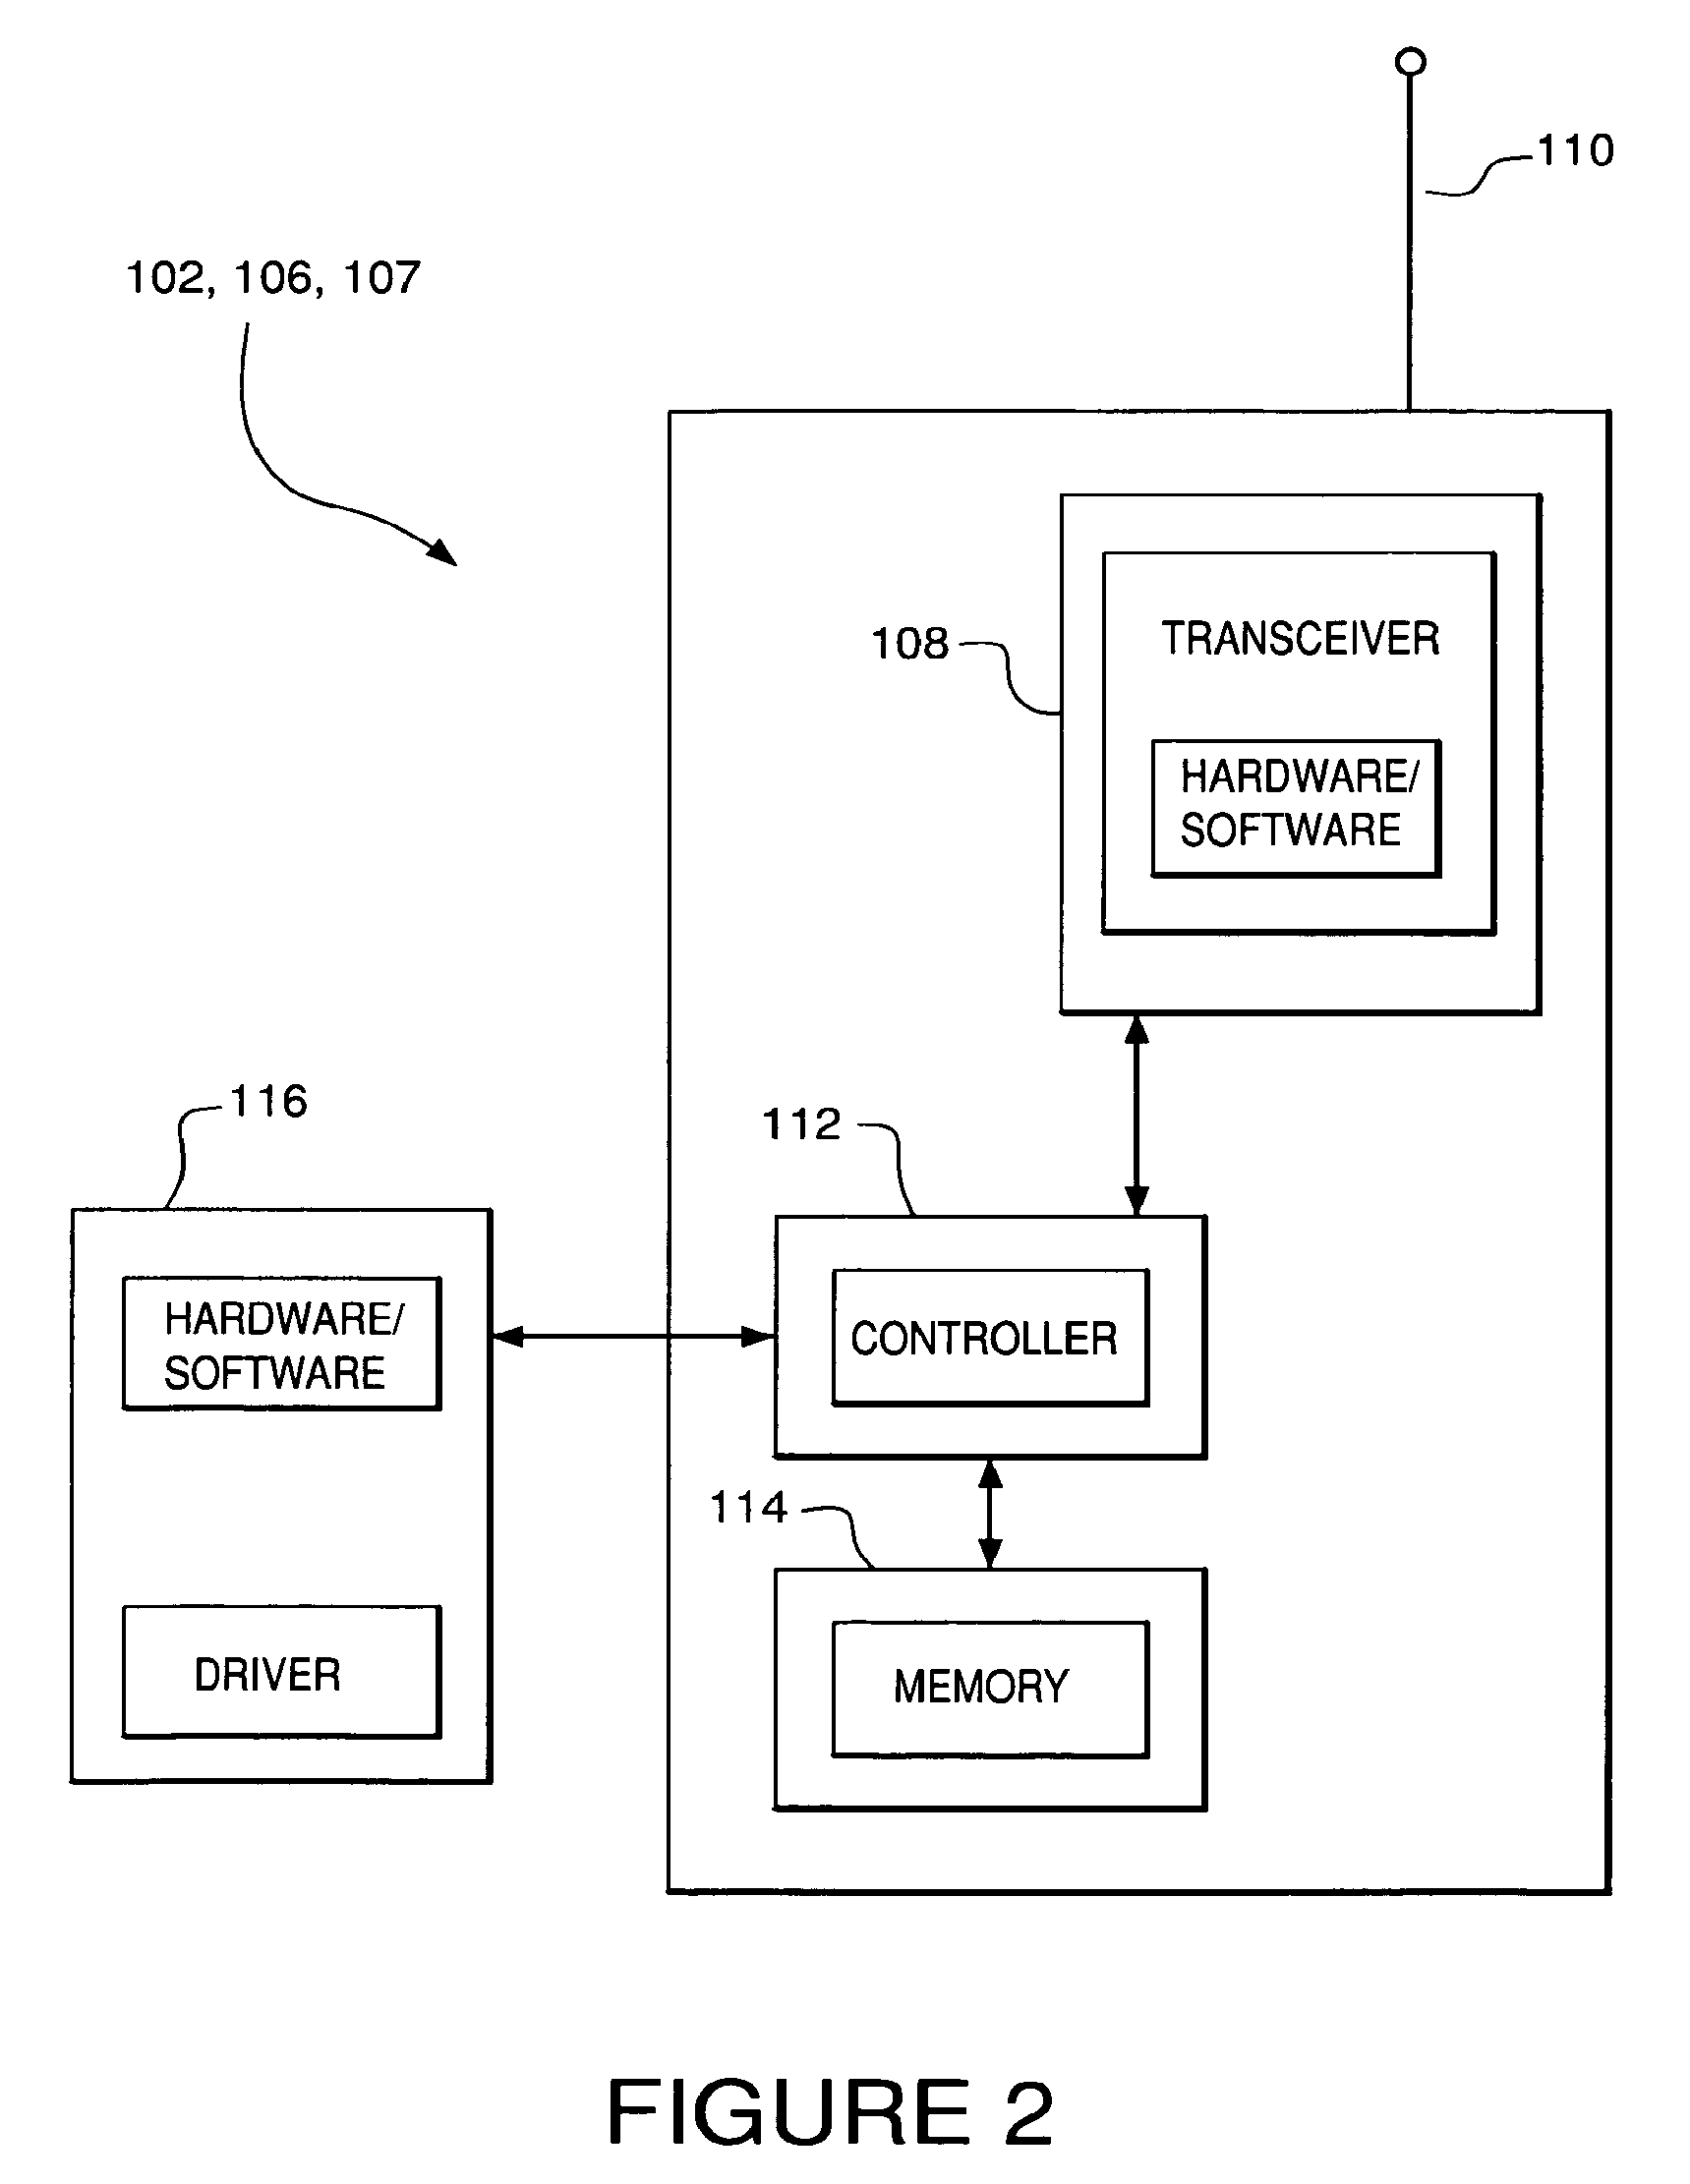 System and method to improve the network performance of a wireless communications network by finding an optimal route between a source and a destination